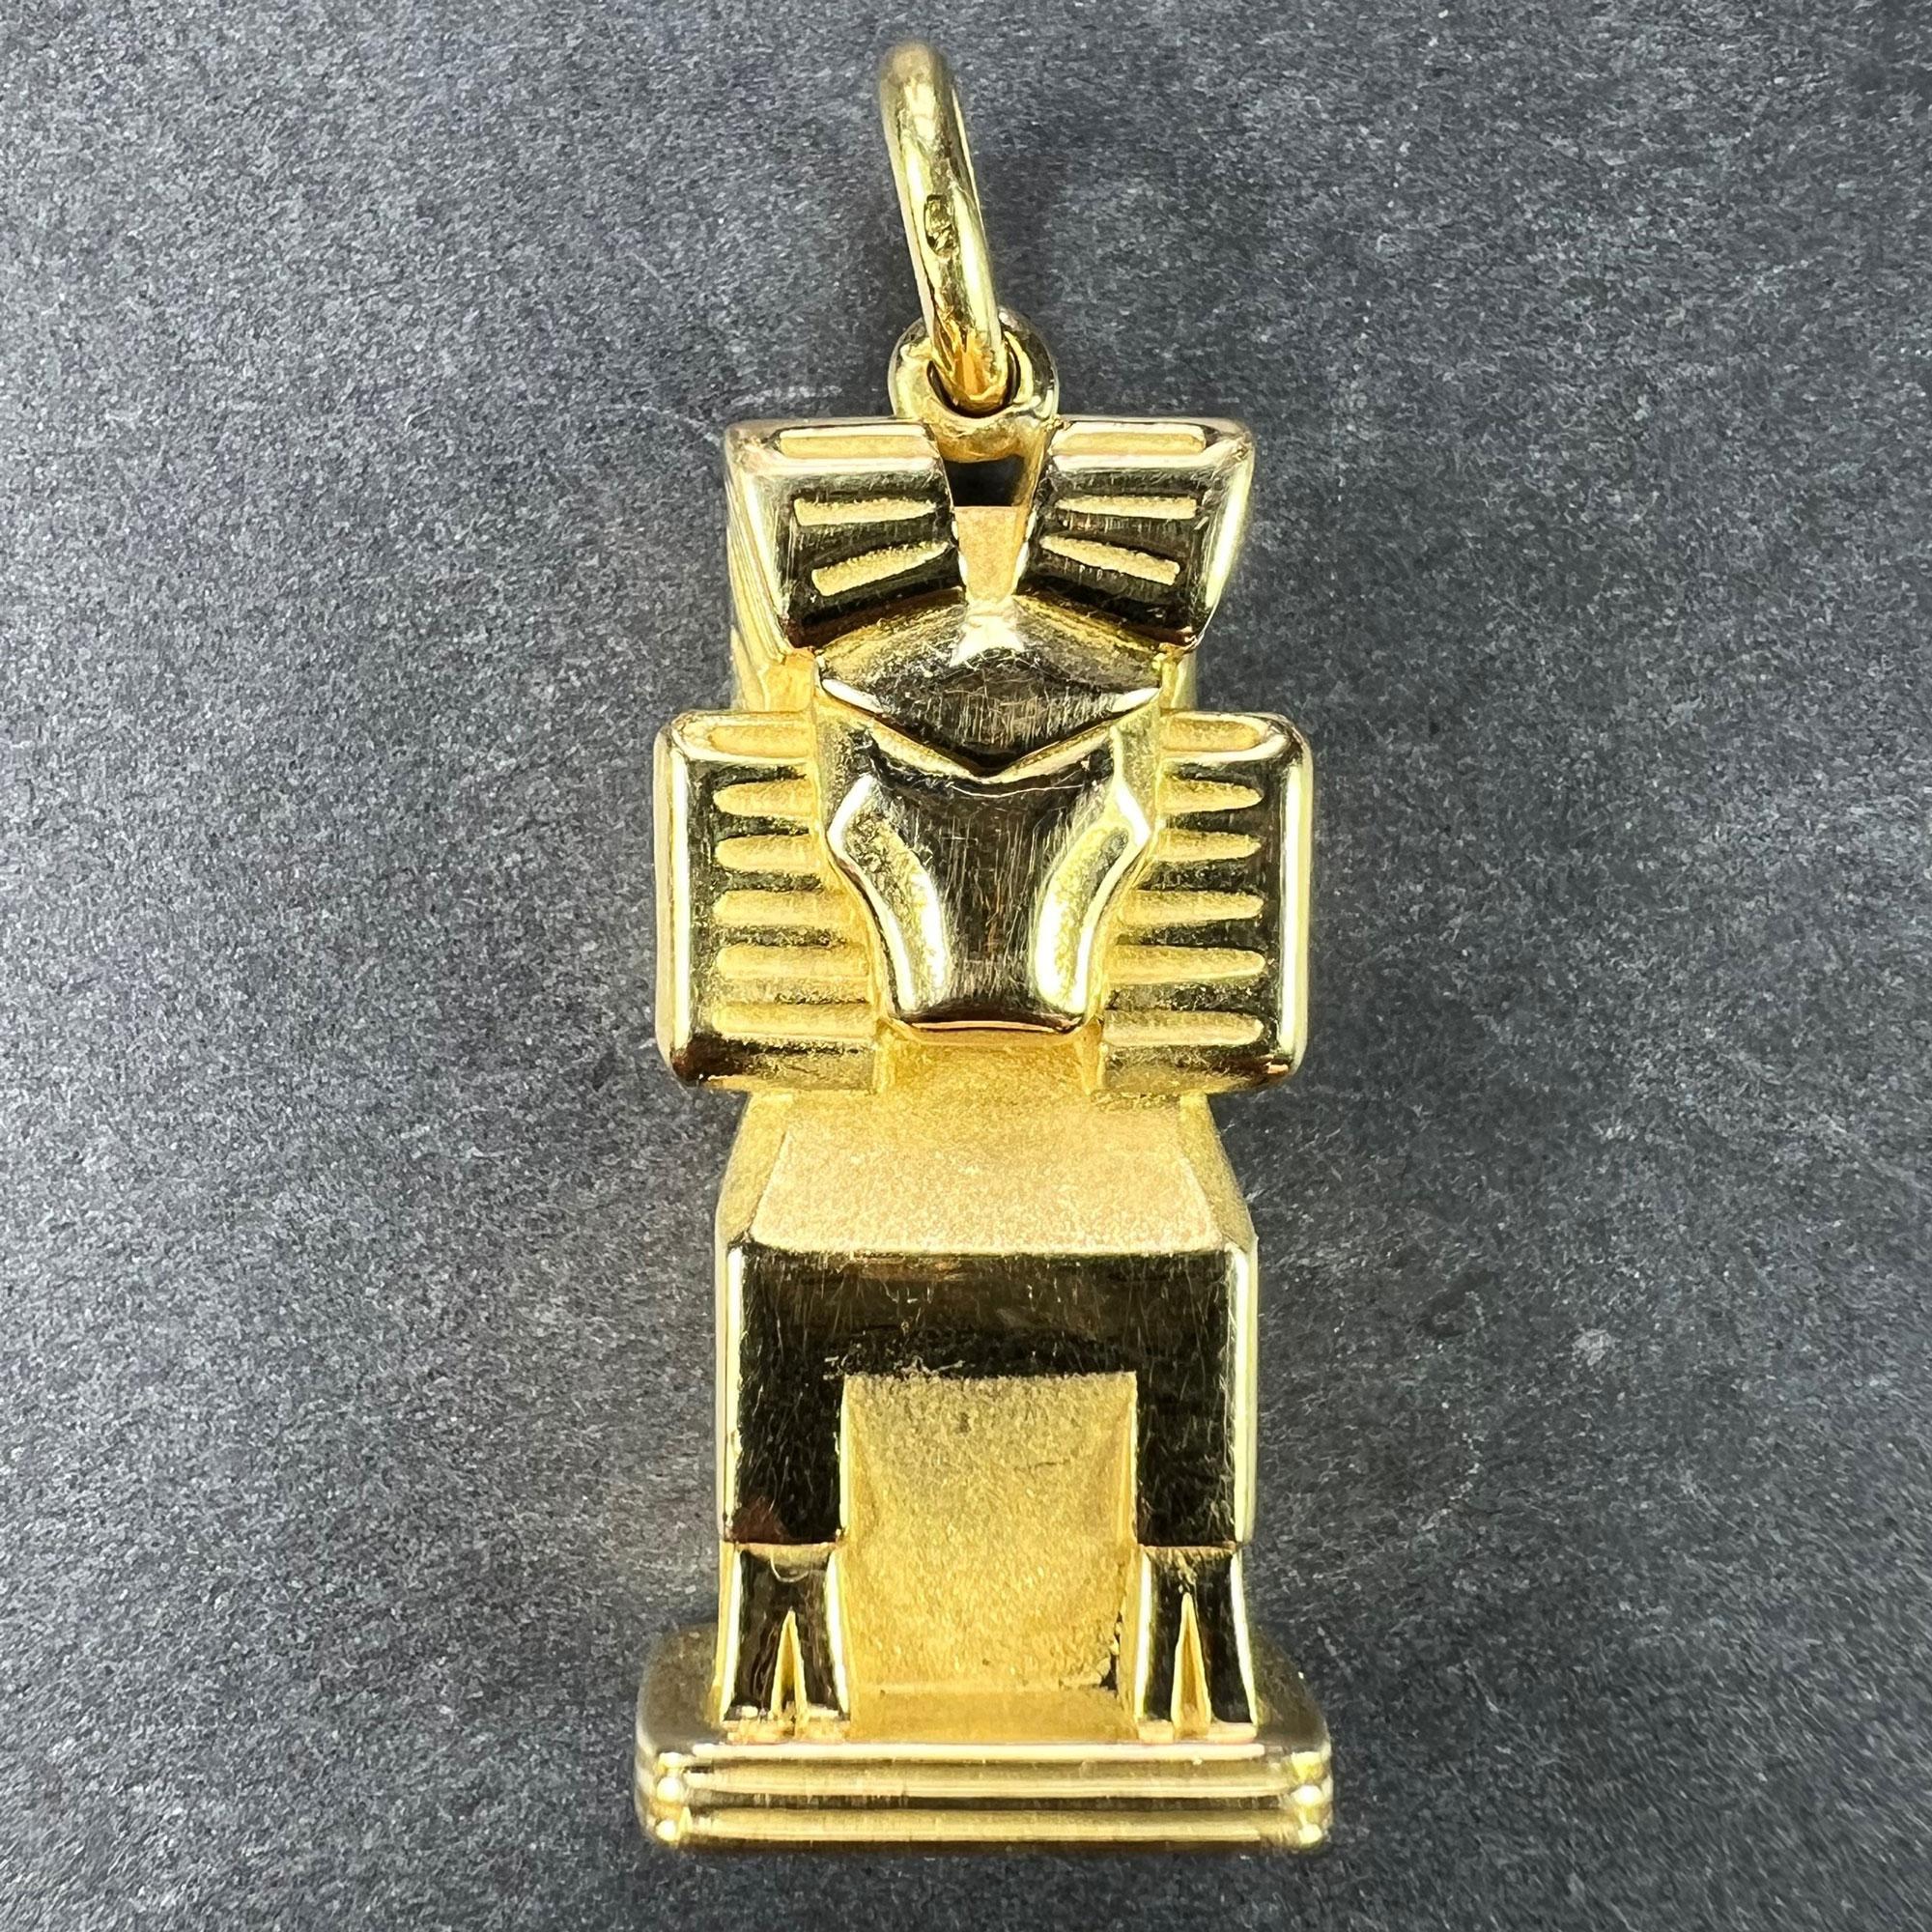 A large French 18 karat (18K) yellow gold pendant depicting a three-dimensional goat representing the Zodiac star sign of Capricorn. Partially stamped with the eagle’s head for French manufacture and 18 karat gold.

Dimensions: 3.1 x 1.4 x 0.81 cm